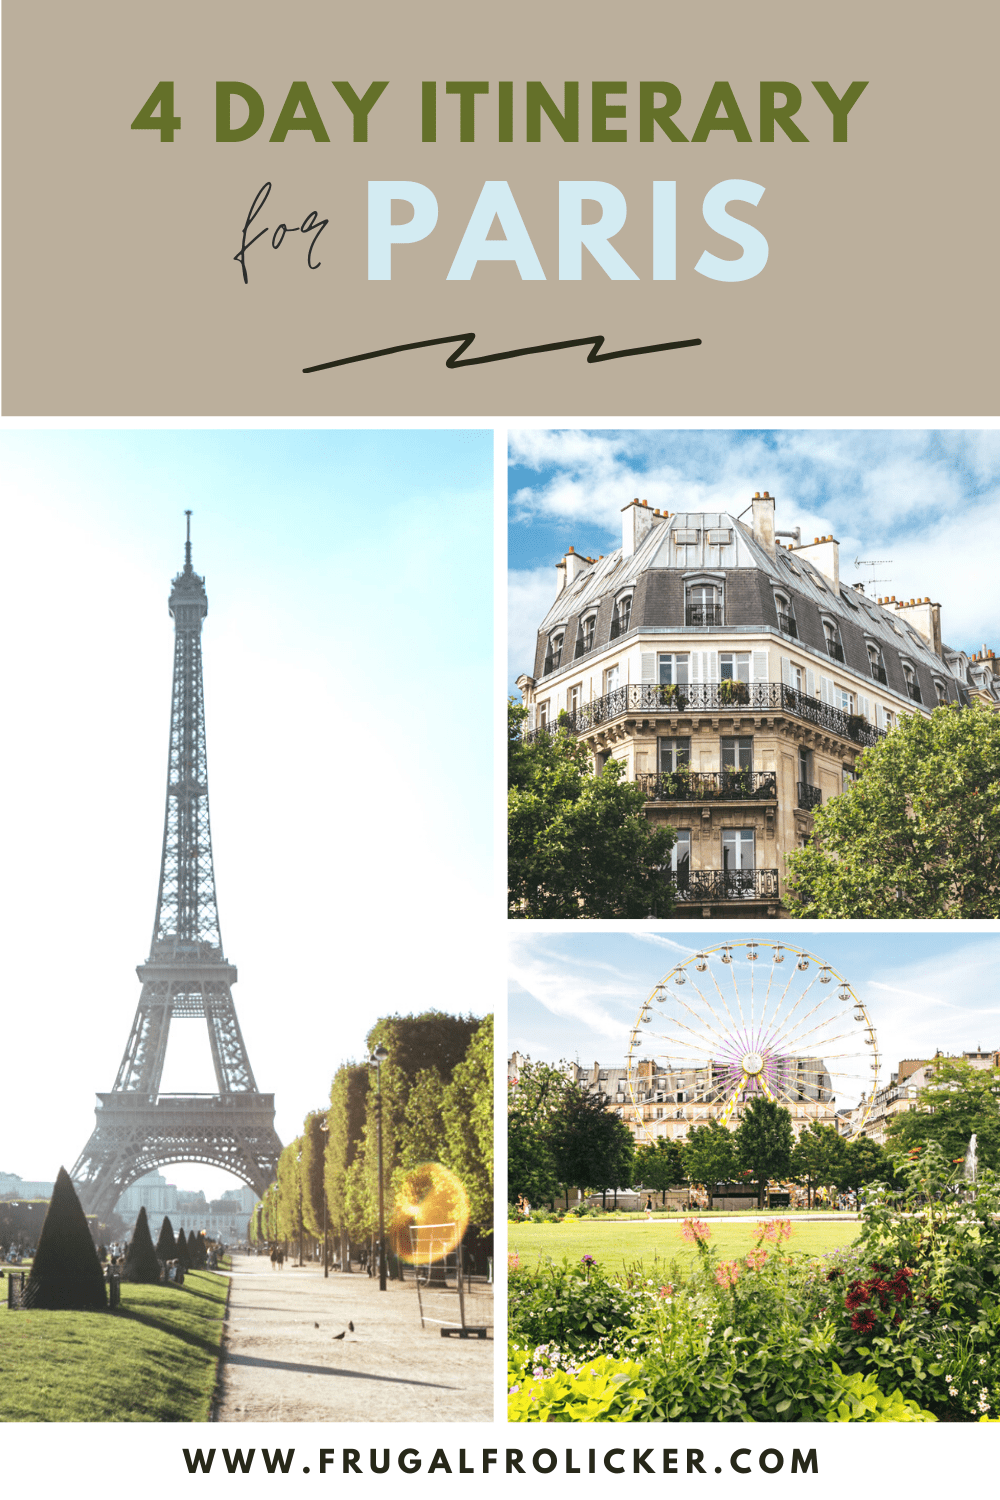 What To Do in Paris For 4 Days: A 4 Day Paris Itinerary